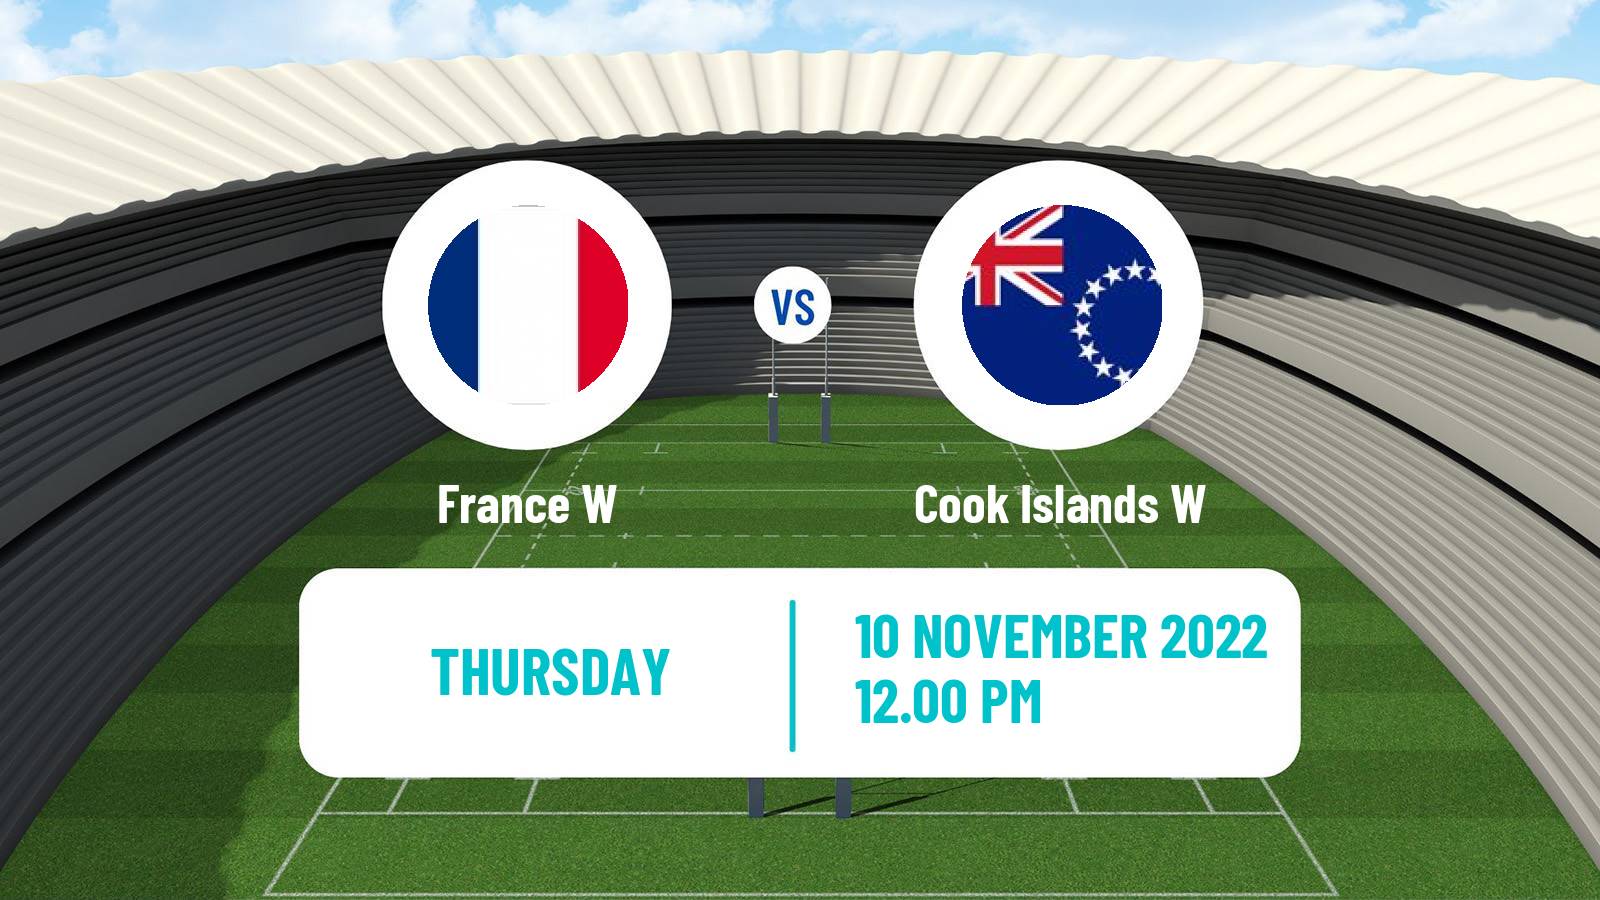 Rugby league World Cup Rugby League Women France W - Cook Islands W